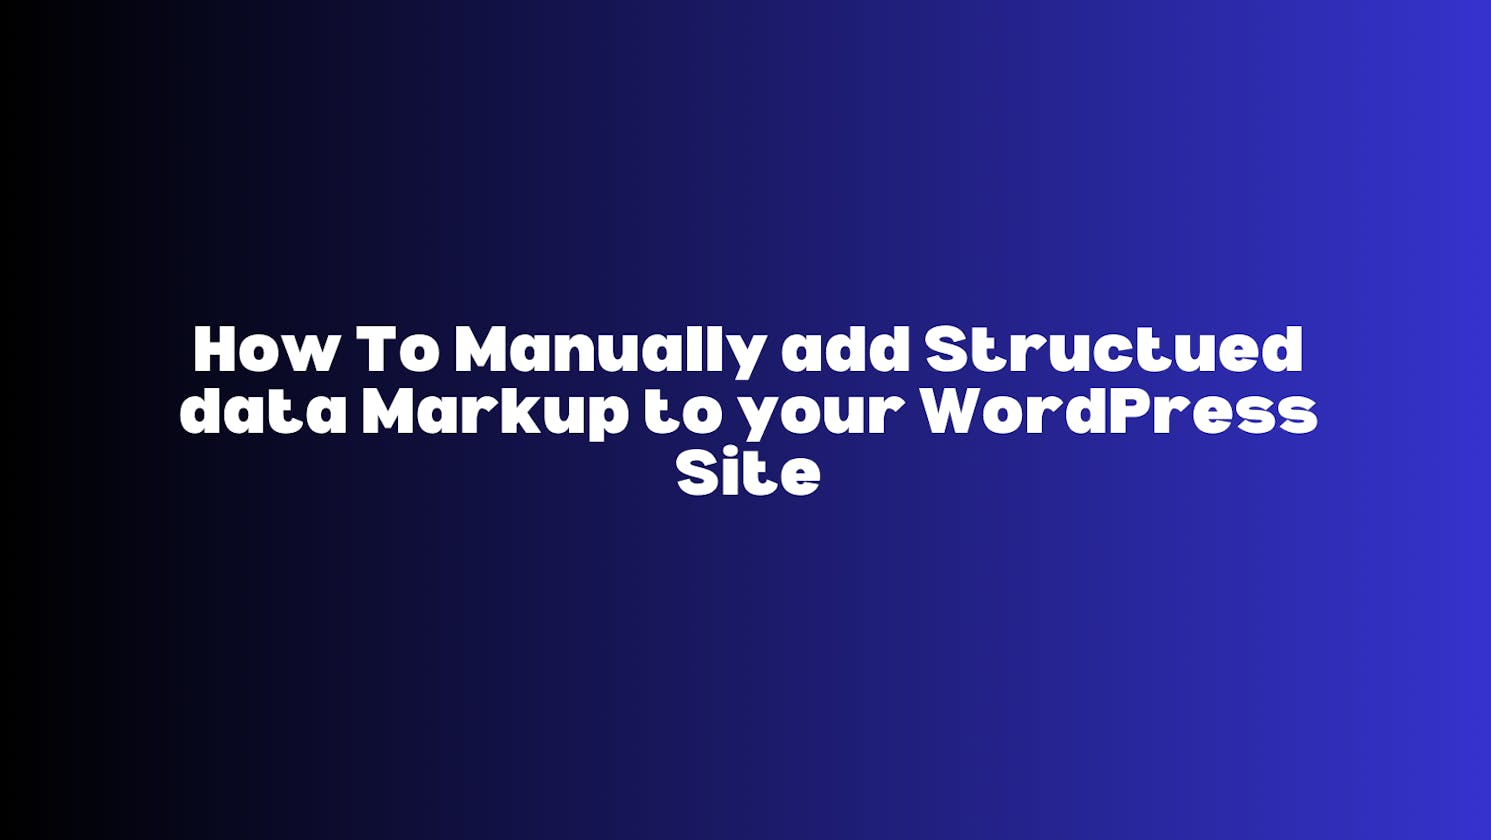 How To Manually Add Structured Data Markup to your WordPress Site